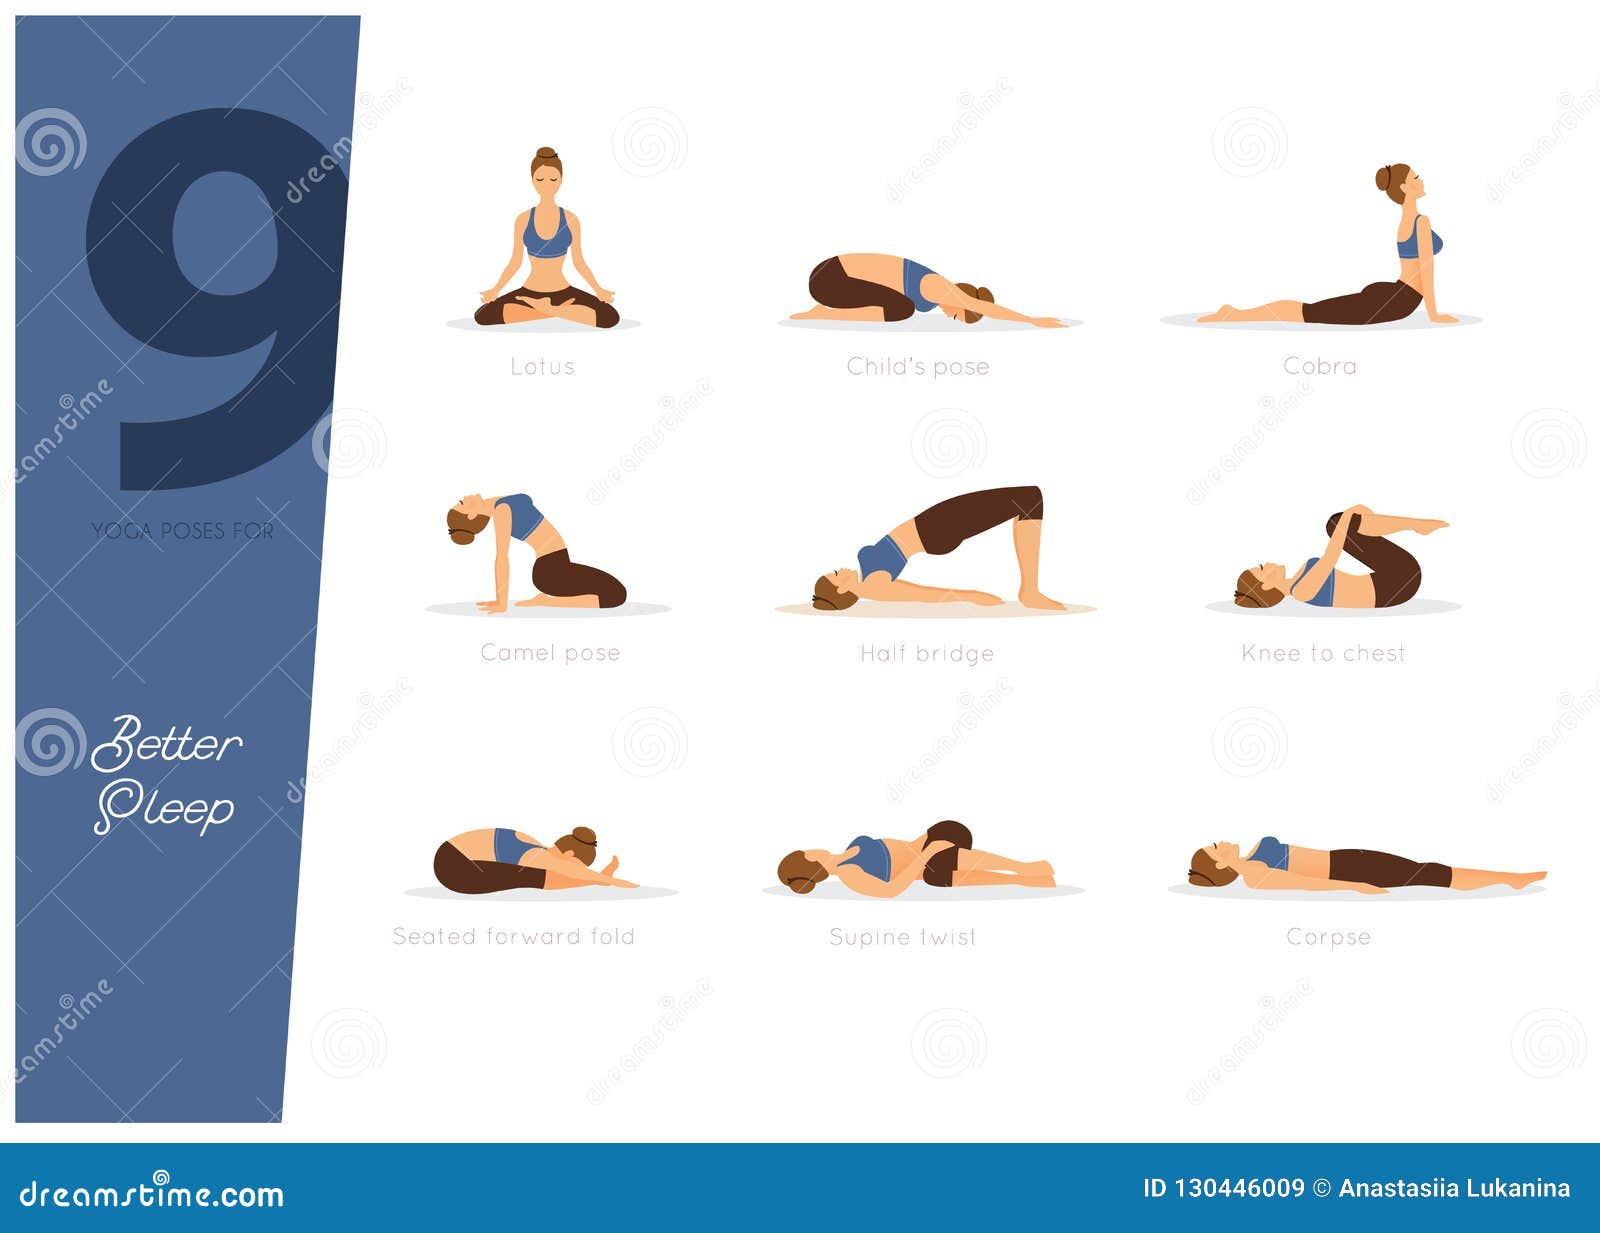 7 Yoga Poses for Sleep | Yoga After Dinner - The Yoga Institute